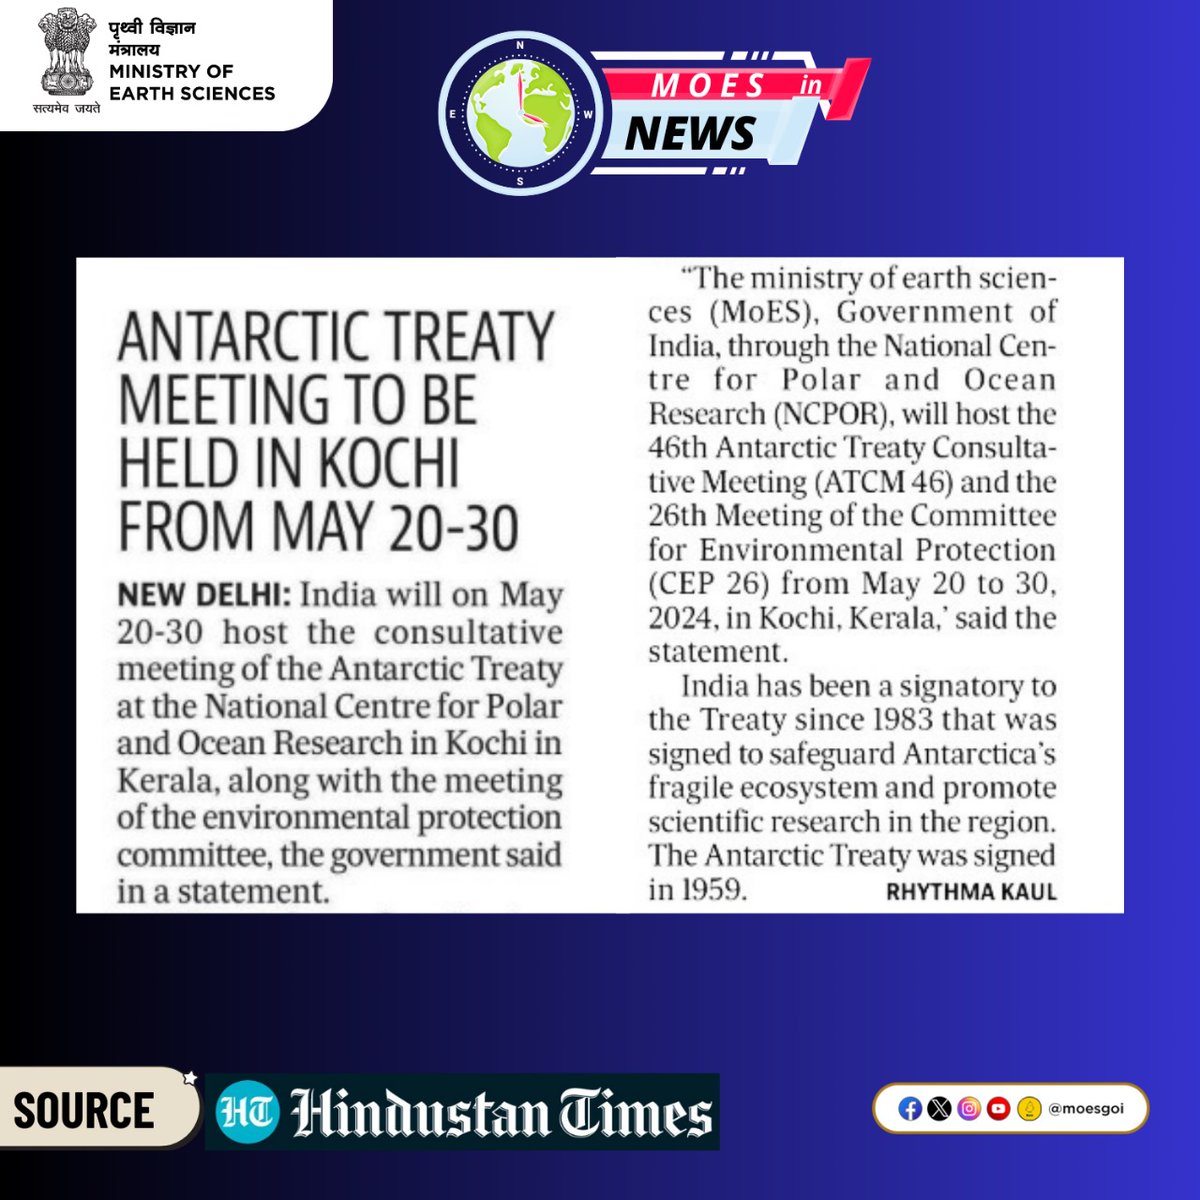 #MoESInNews 
NCPOR will host the 46th Antarctic Treaty Consultative Meeting and the 26th Meeting of the Committee for Environmental Protection in 2024. 🌎 This is a major milestone for India in global collaboration and environmental stewardship. 
#Antarctica #GlobalCollaboration